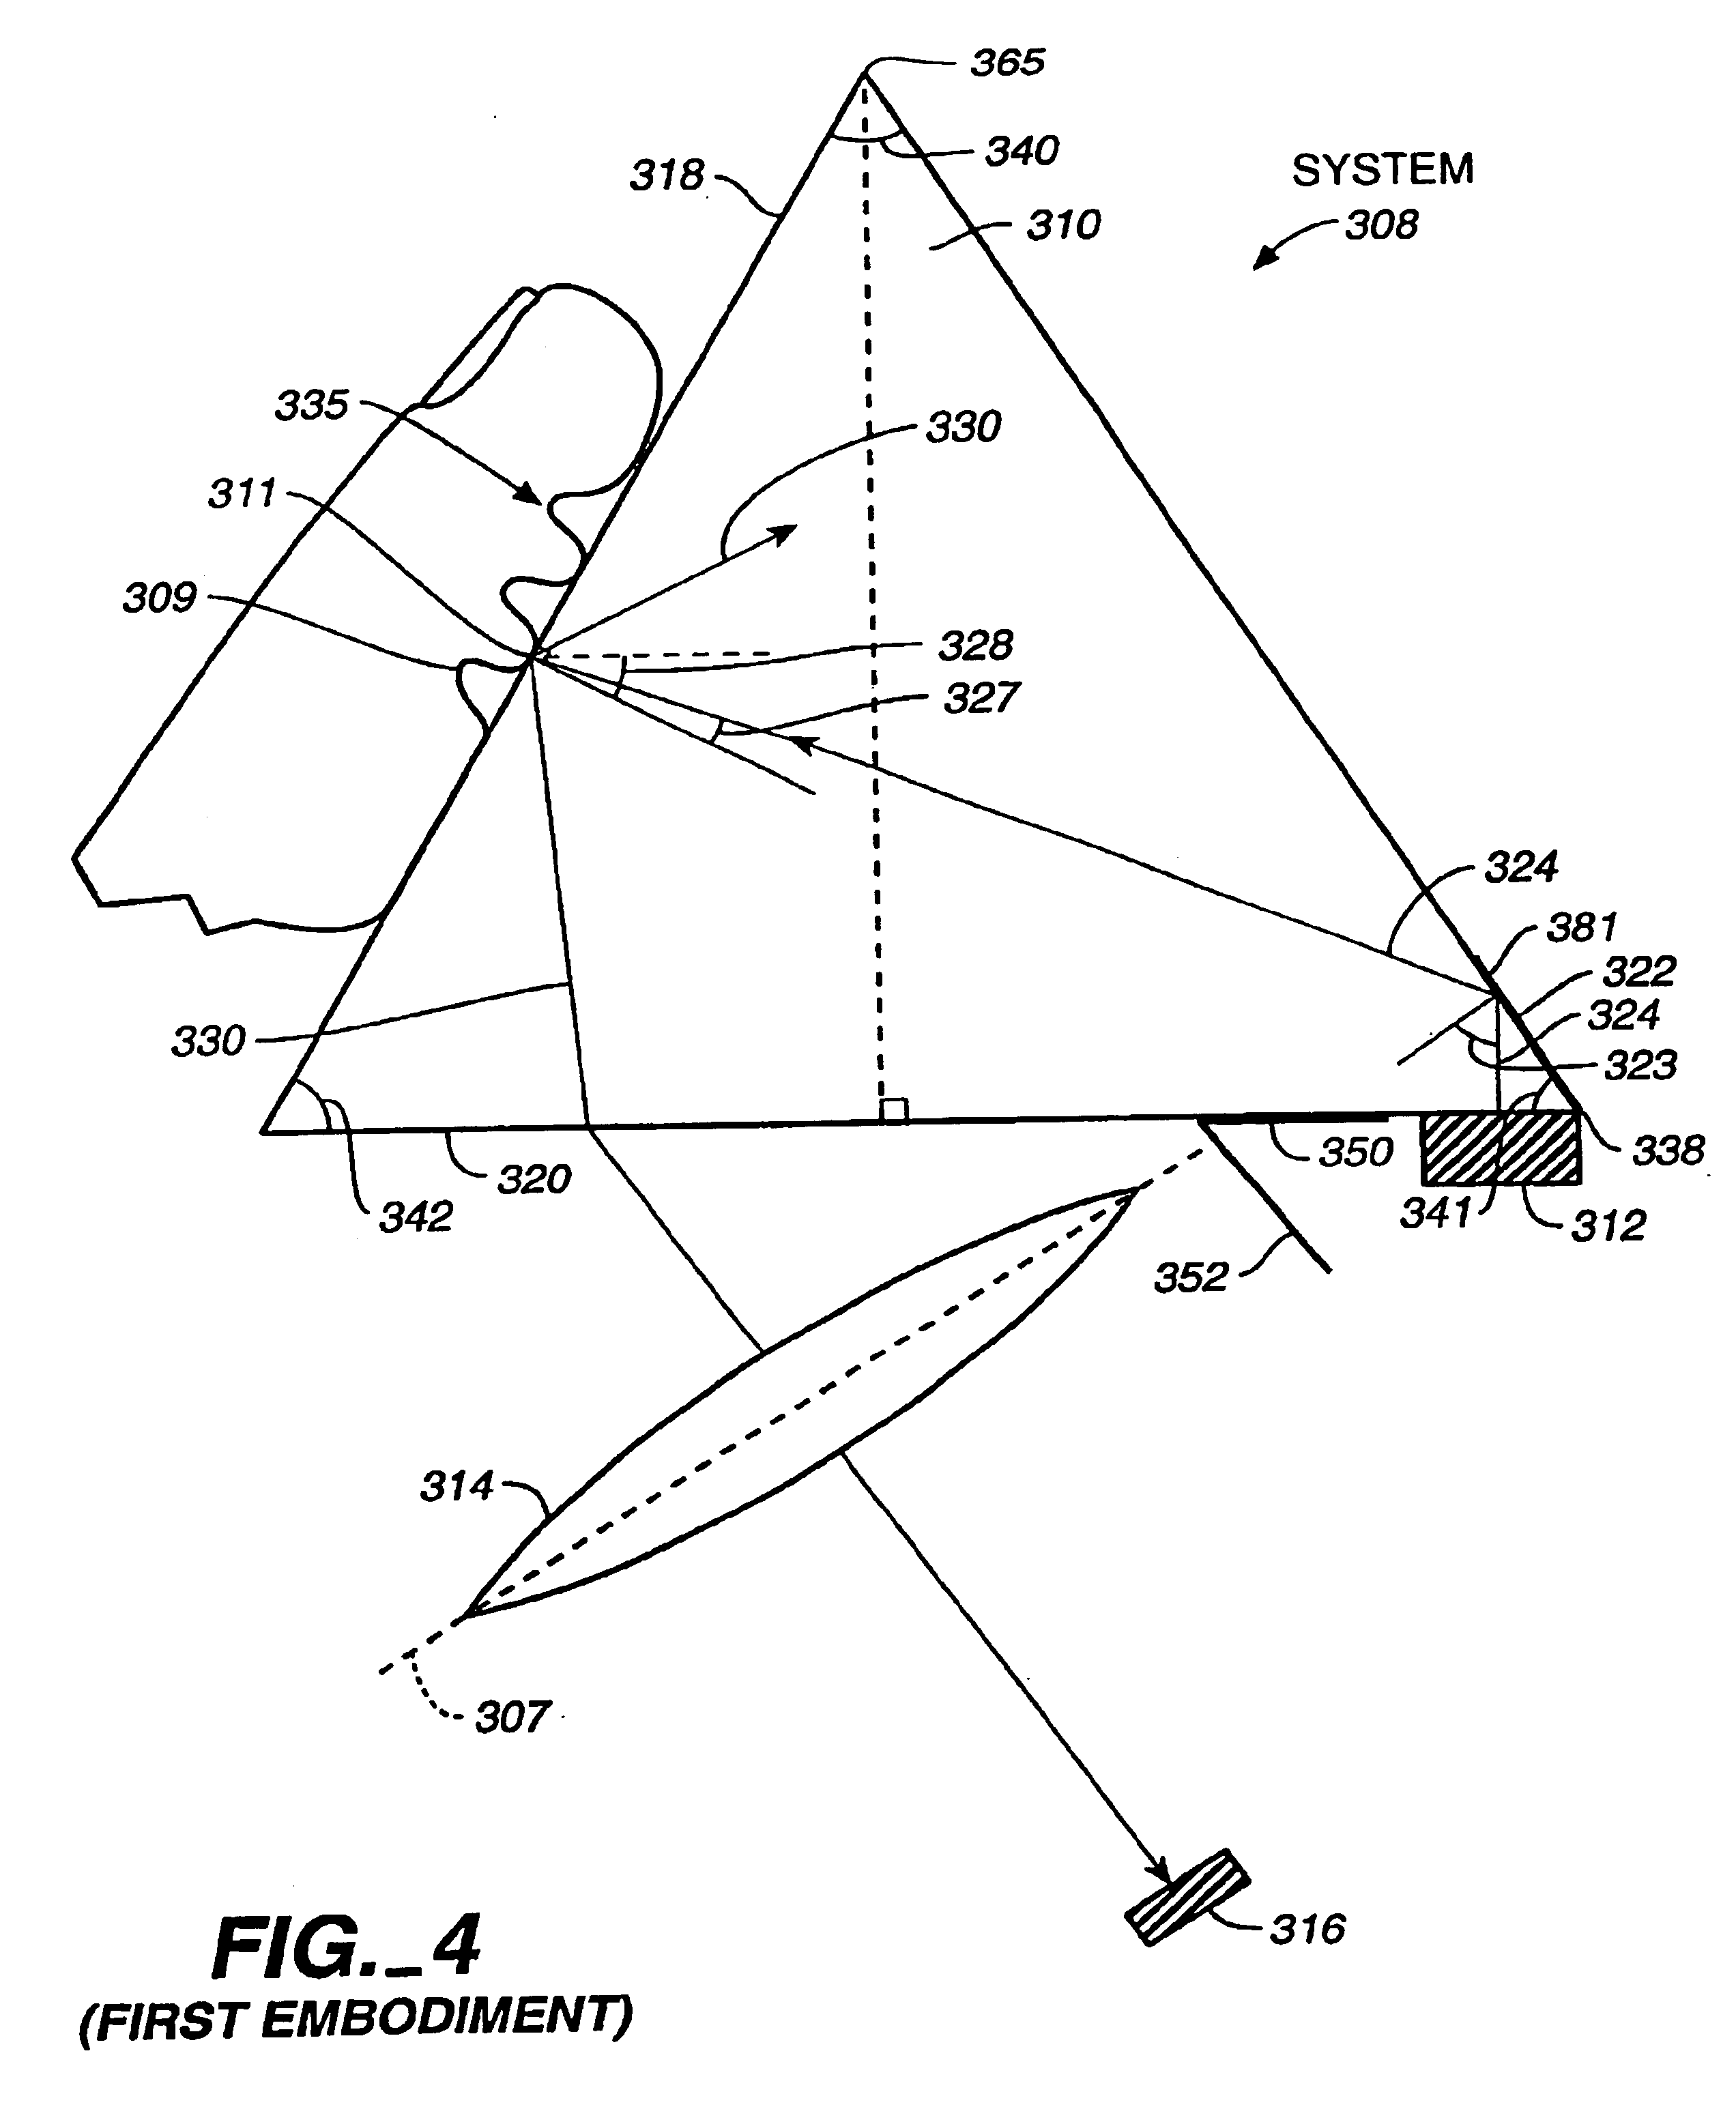 High contrast, low distortion optical acquisition system for image capturing